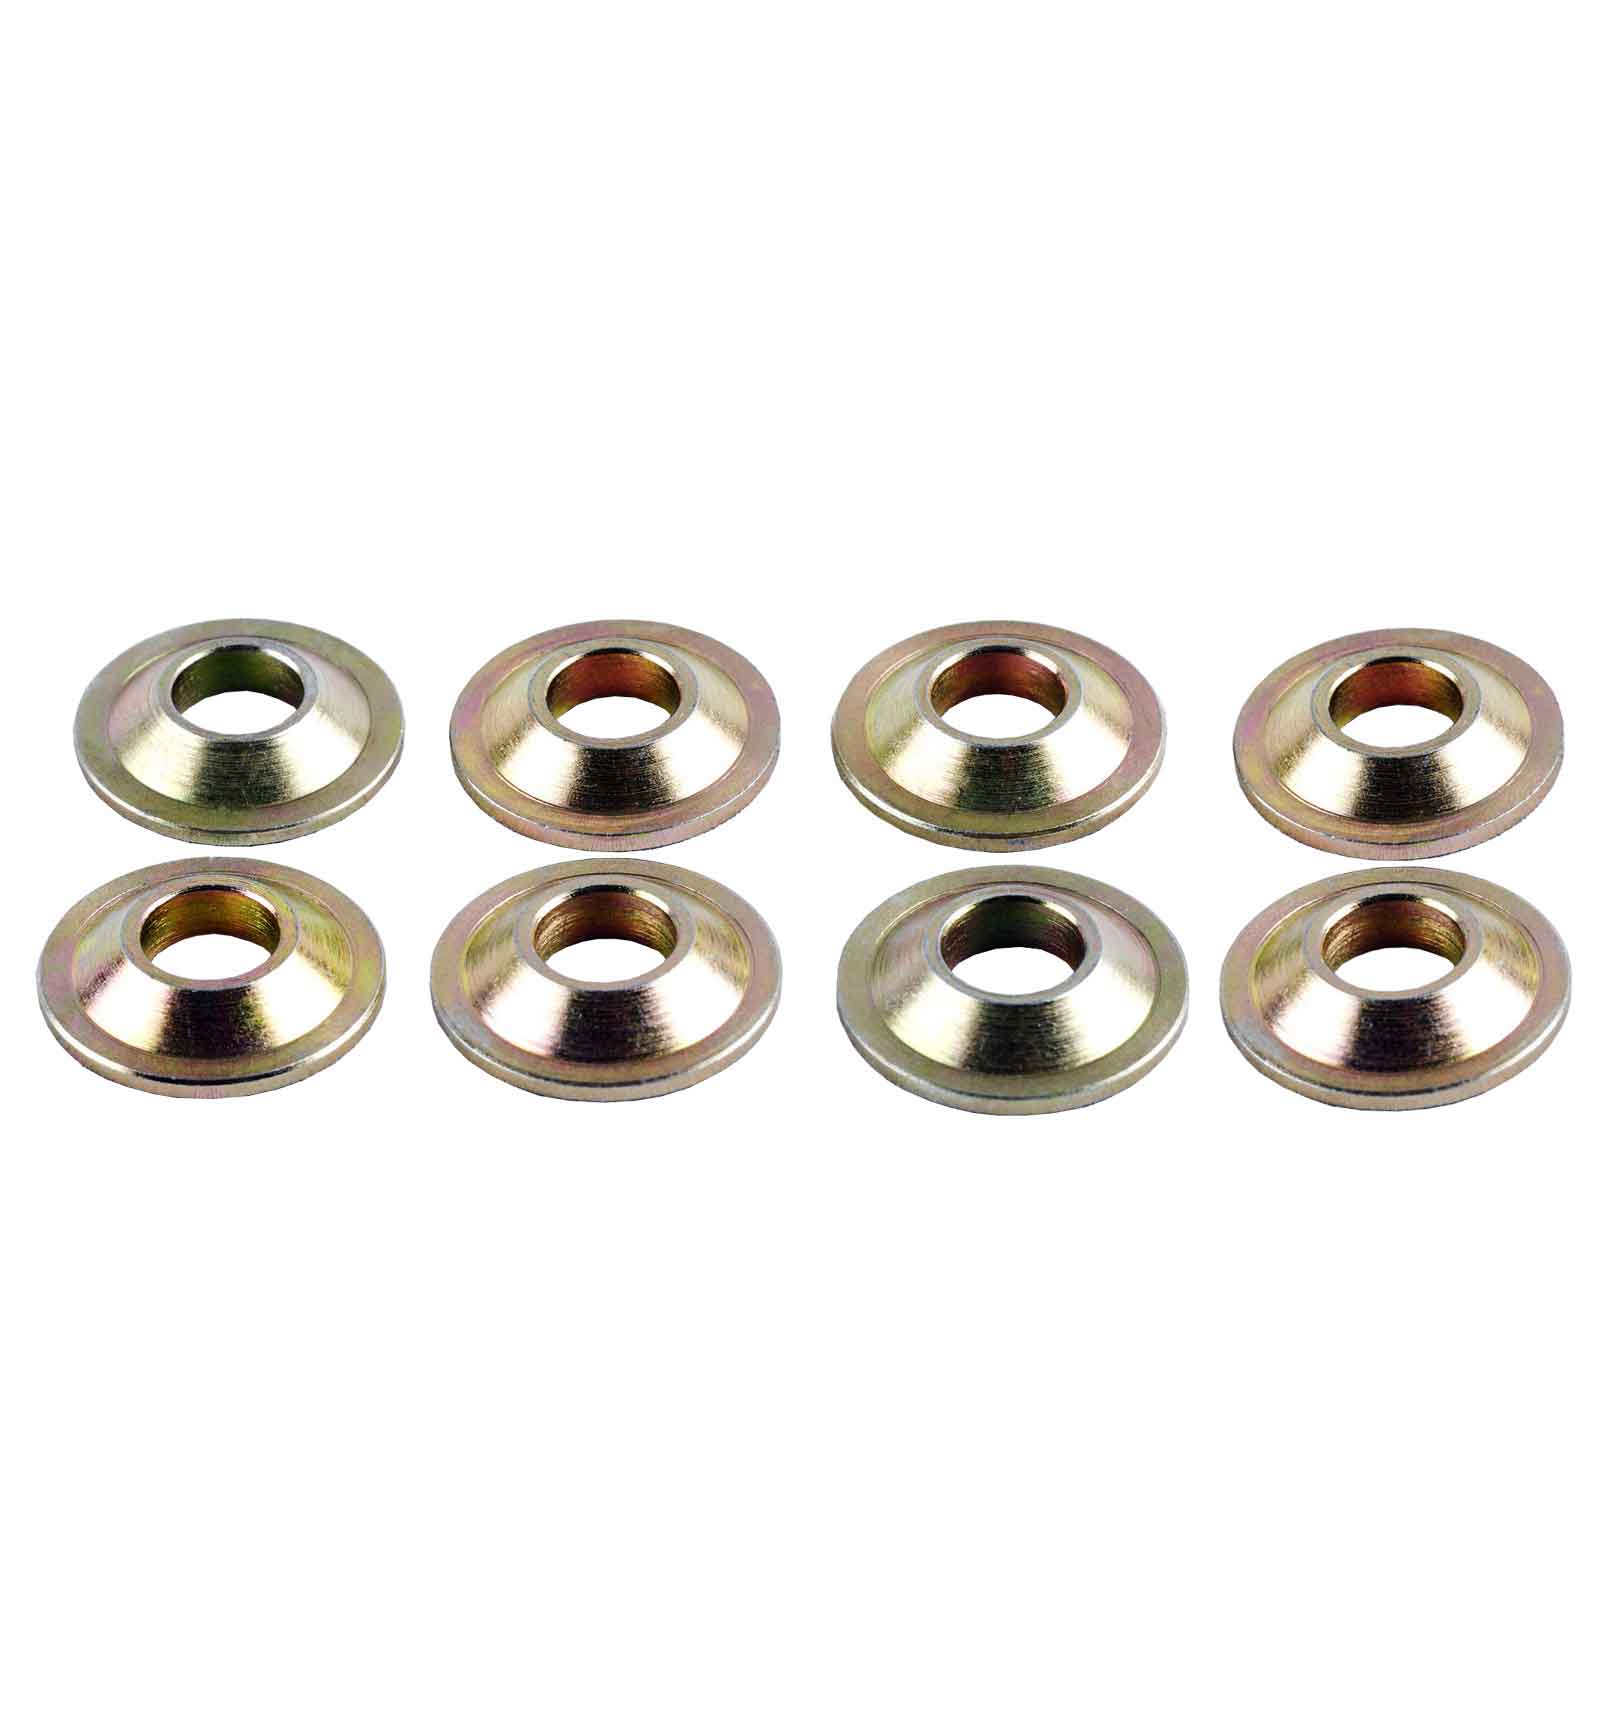 3/8" Rose Joint Misalignment Spacers (Pack of 8)